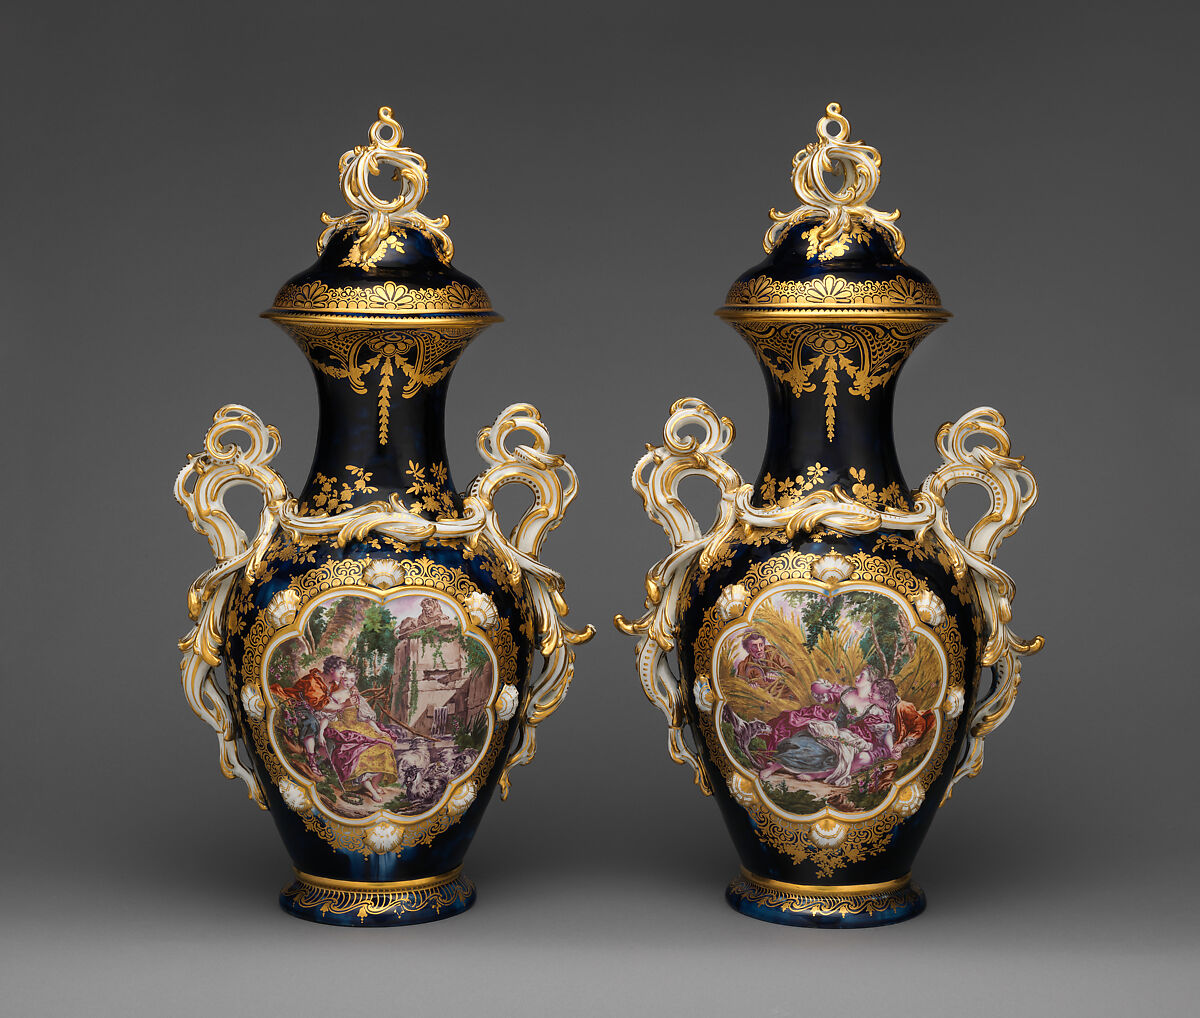 Vase (one of a pair), Chelsea Porcelain Manufactory (British, 1744–1784), Soft-paste porcelain decorated in polychrome enamels, gold, British, Chelsea 